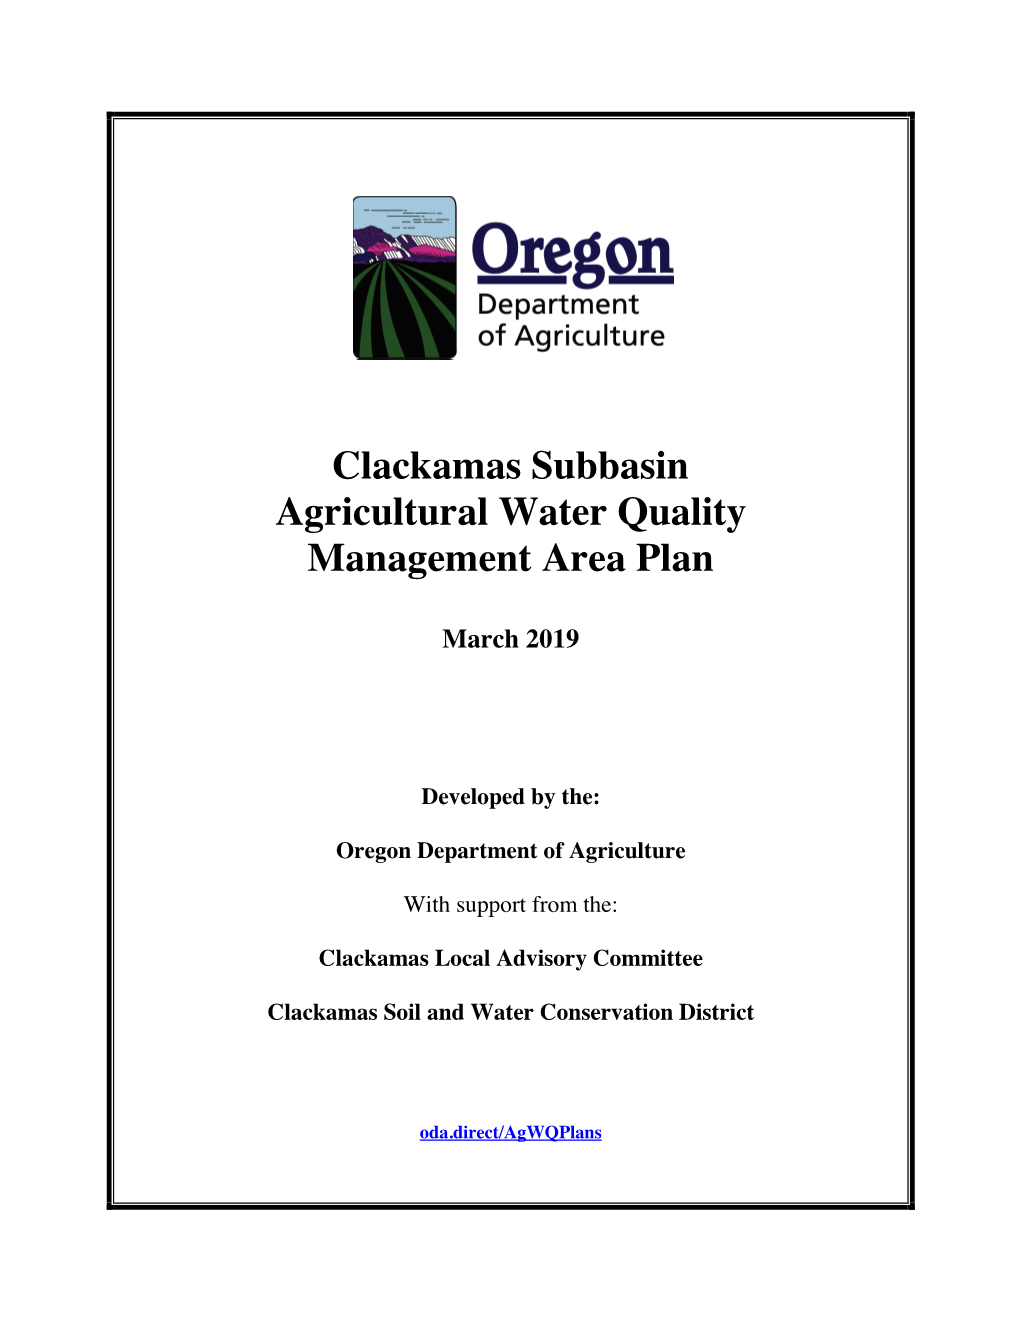 Clackamas Subbasin Agricultural Water Quality Management Area Plan